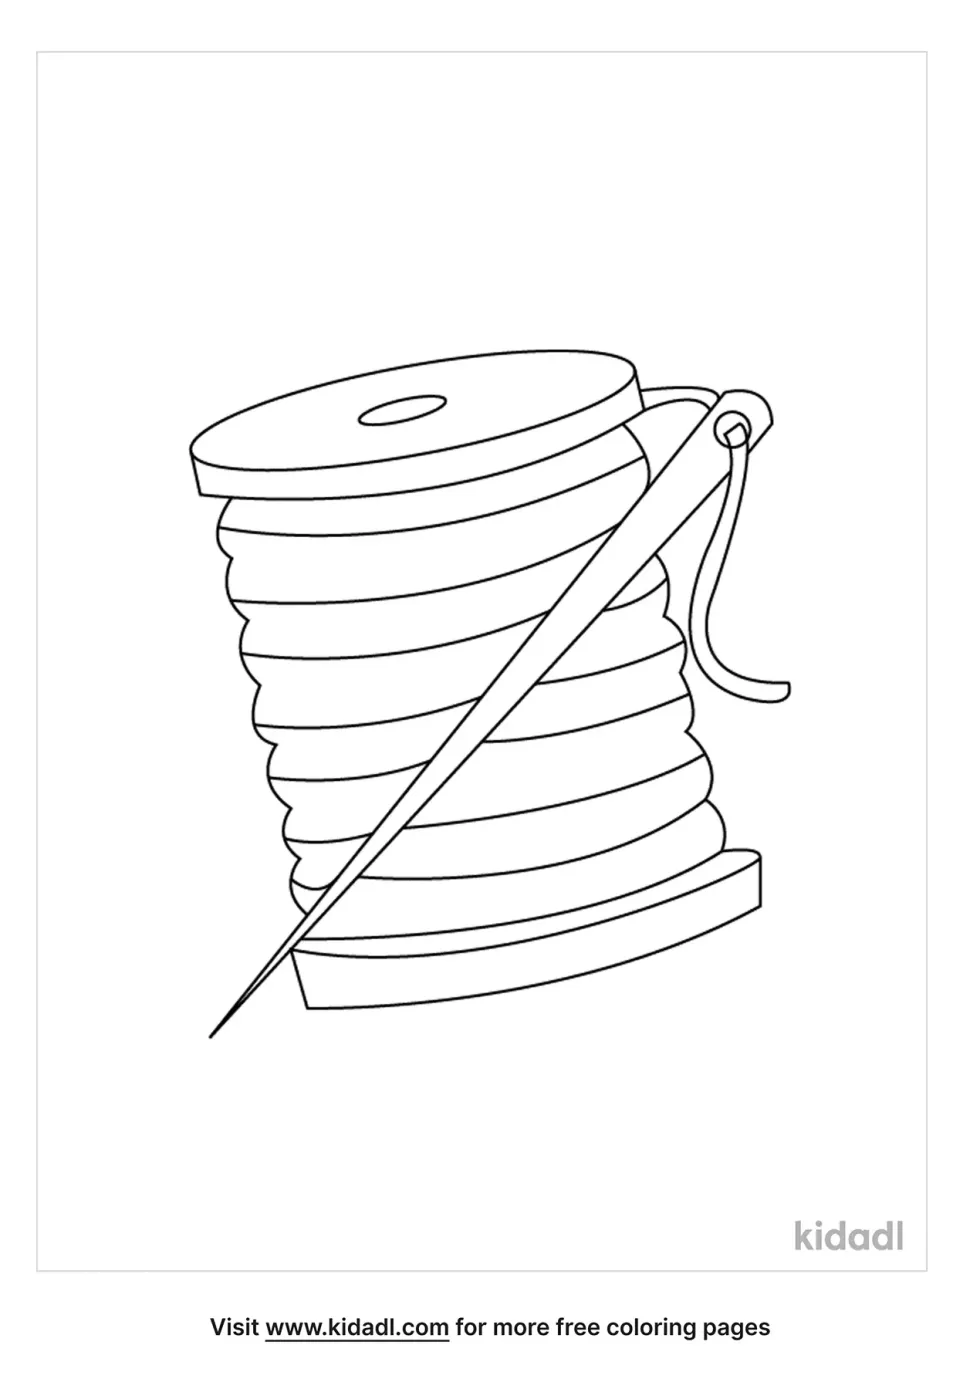 Needle And Thread Coloring Page